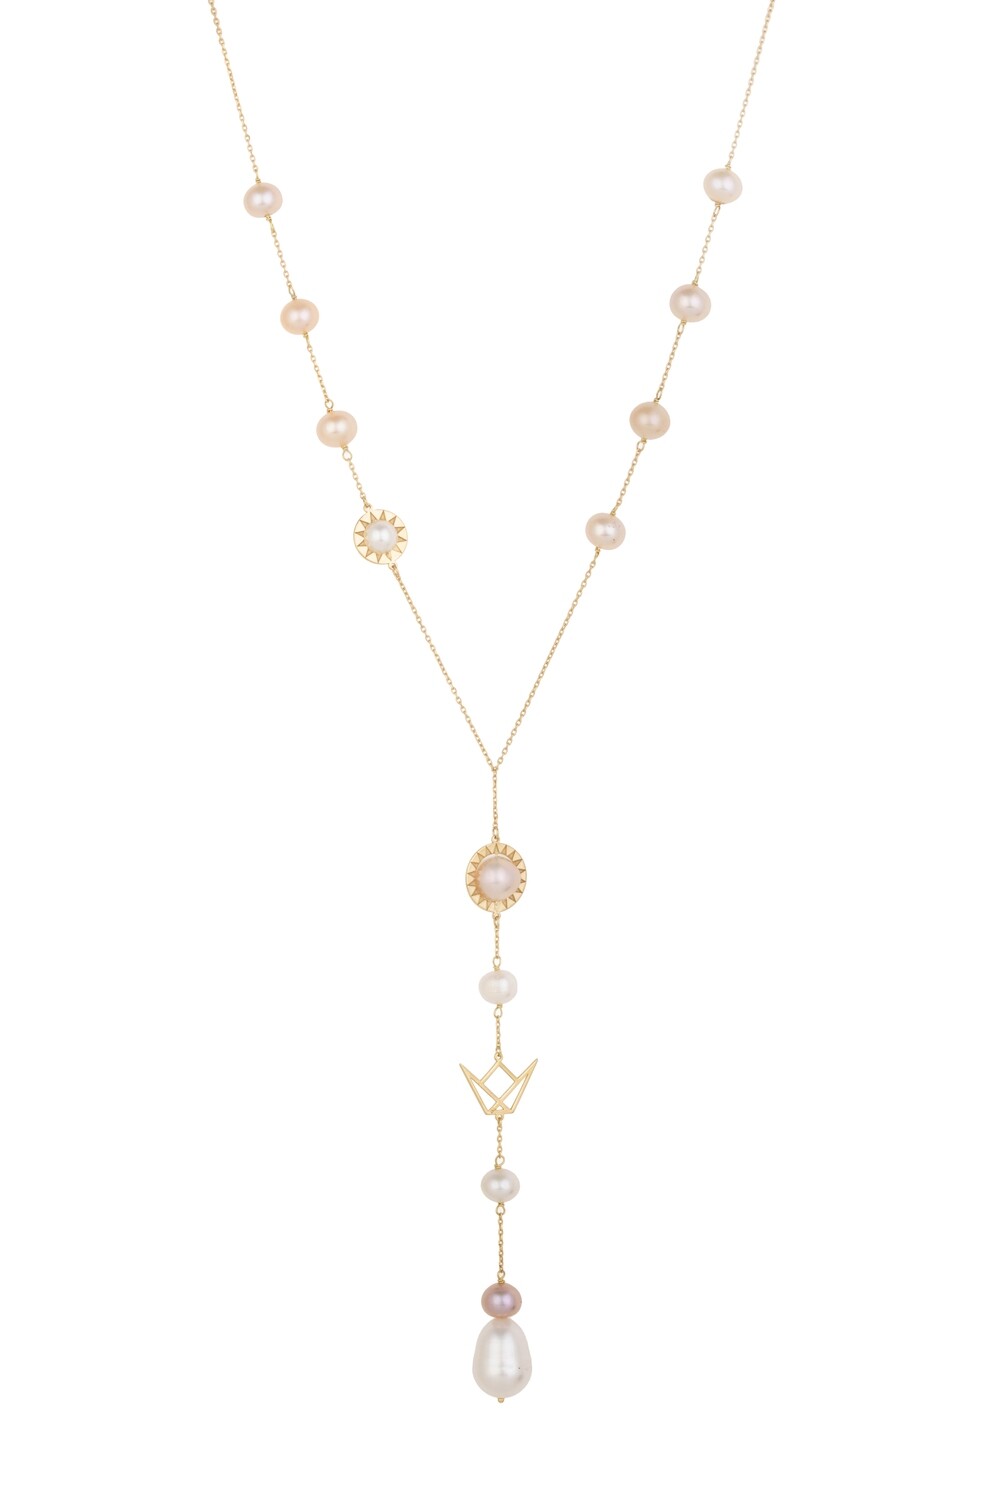 Emblem Gold Necklace with Pearls